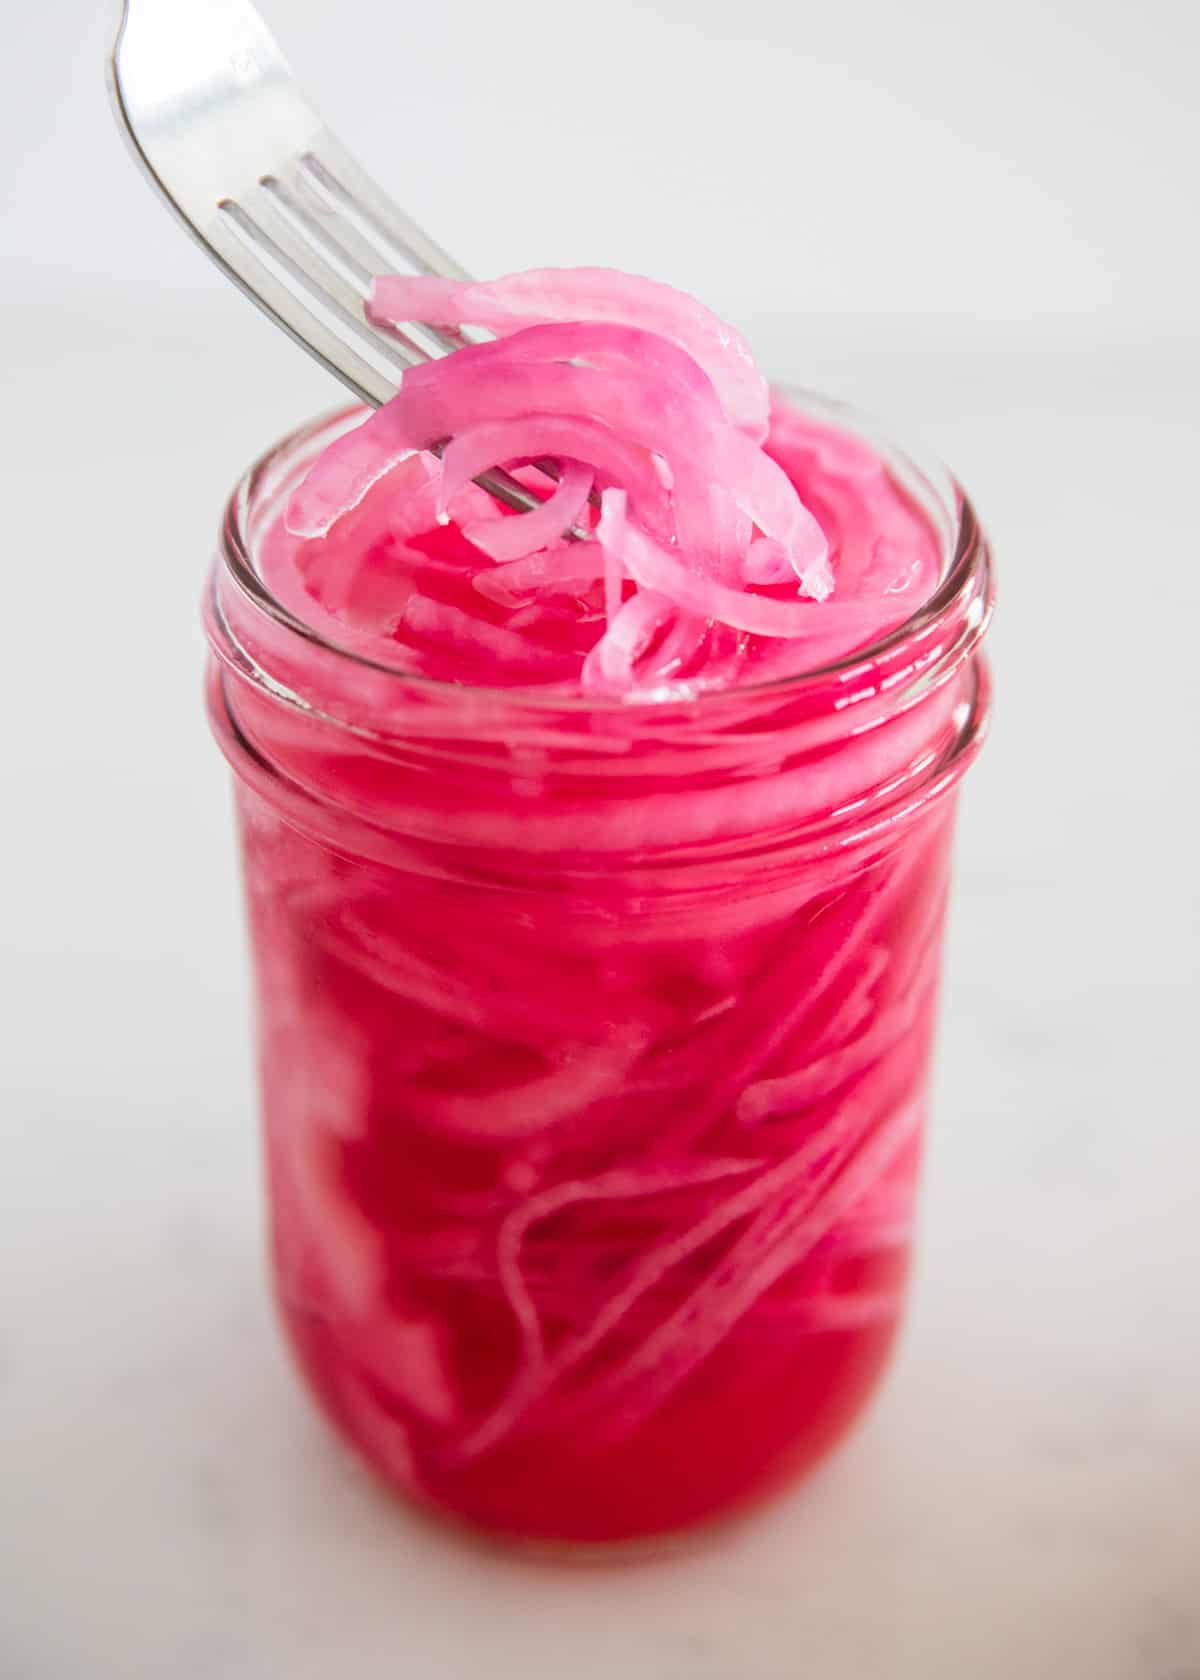 Lifting pickled red onions out of jar with a fork.